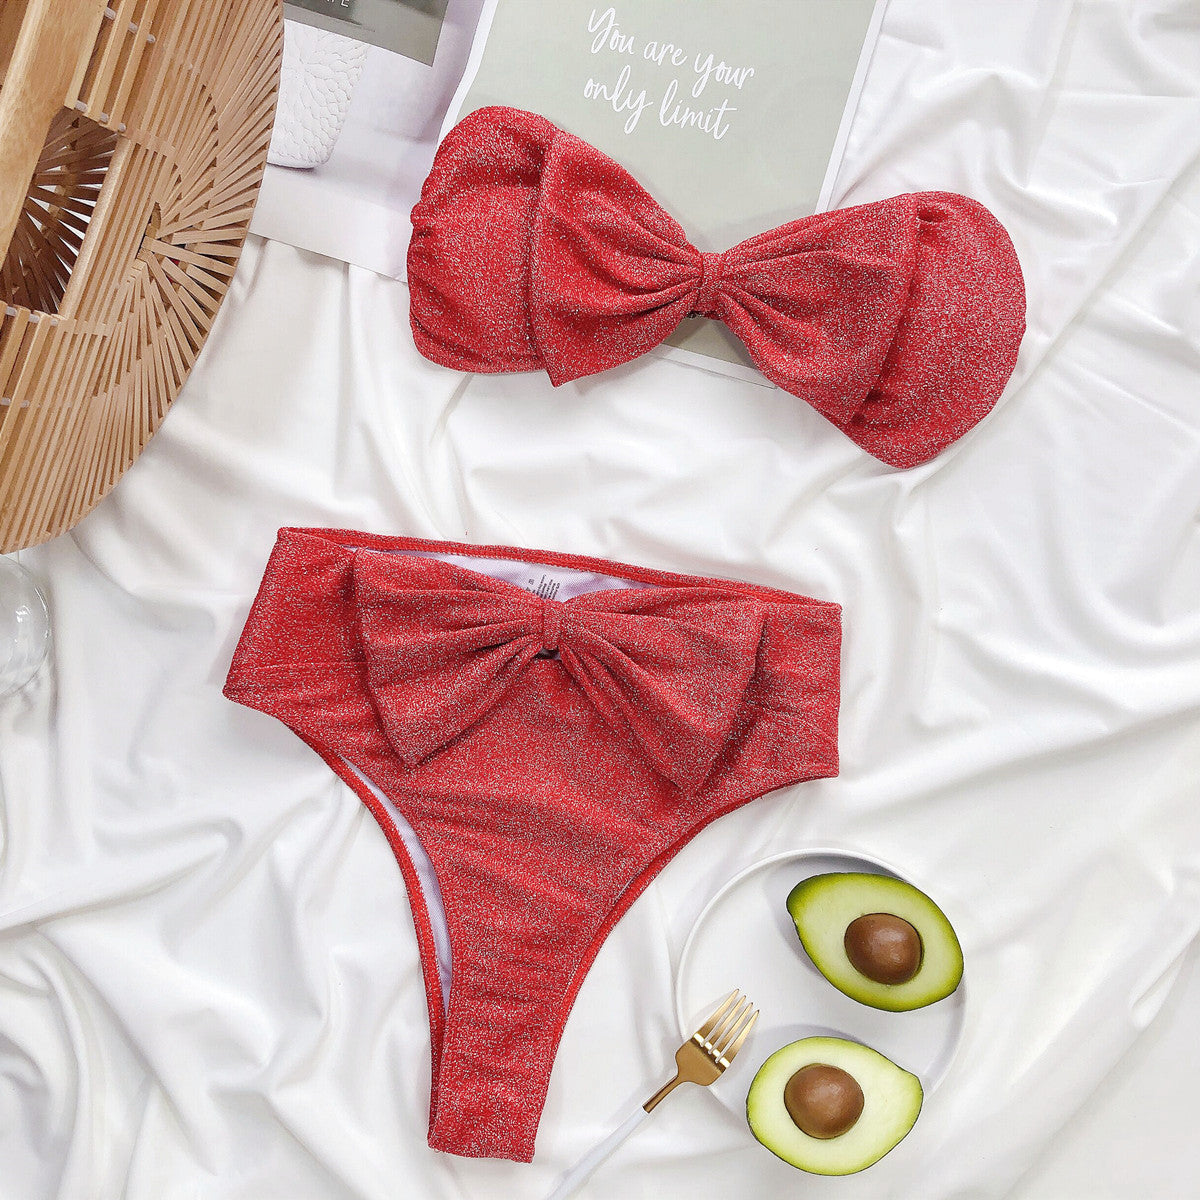 Pink Velvet High Waisted Bikini with Double Bows - Top and Bottom